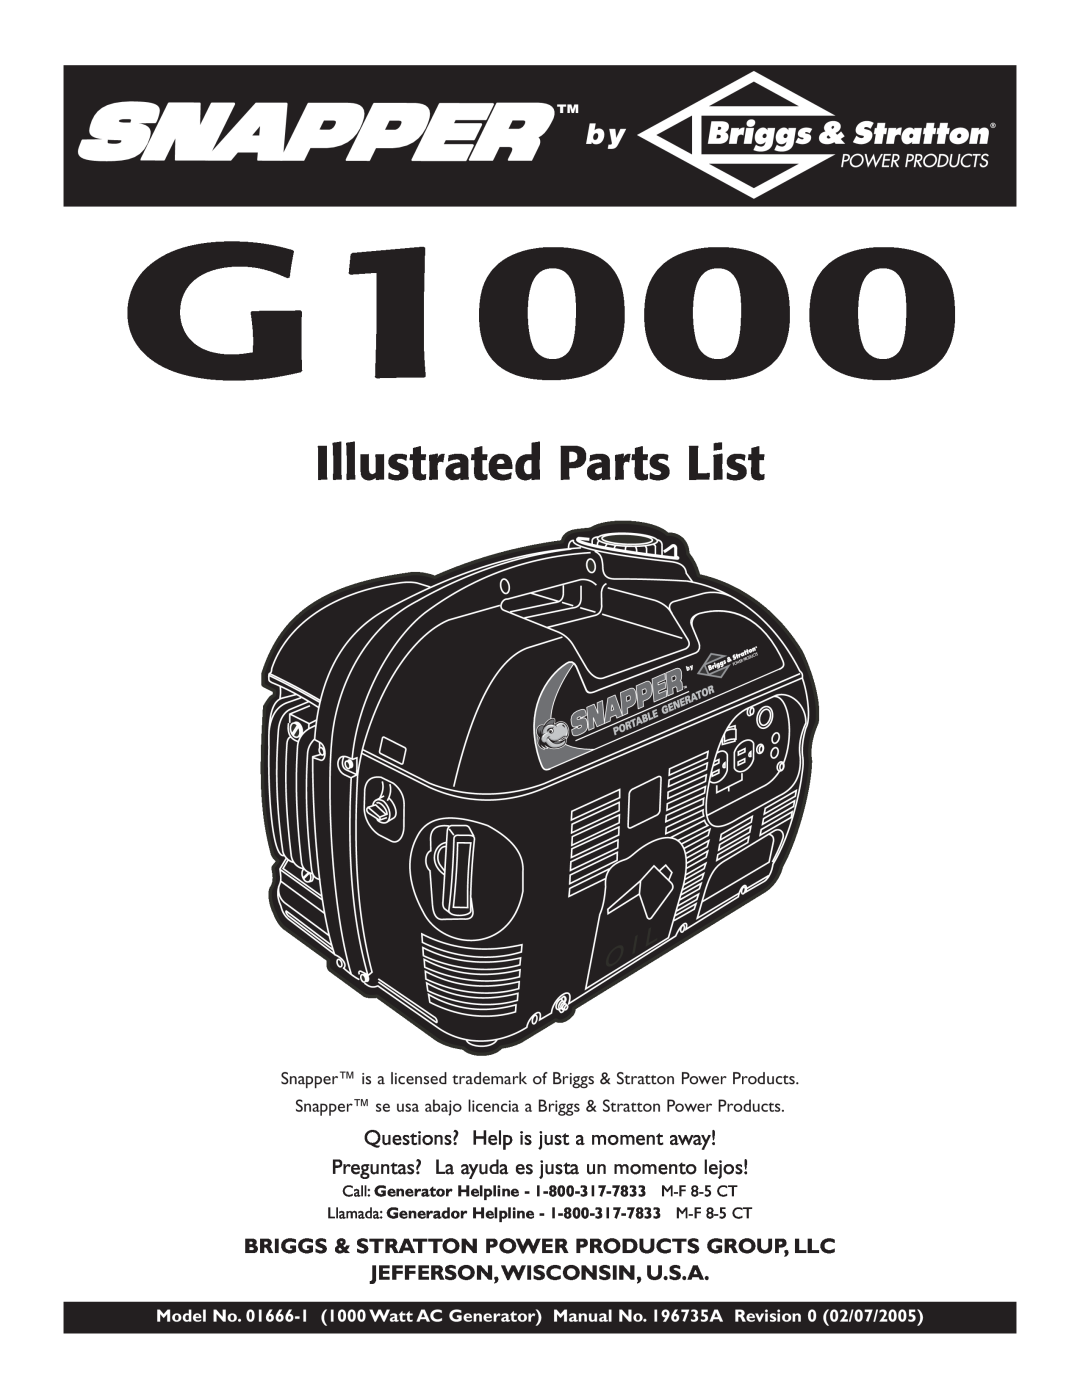 Snapper 01666-1 manual G1000, Illustrated Parts List, Questions? Help is just a moment away, Jefferson,Wisconsin, U.S.A 